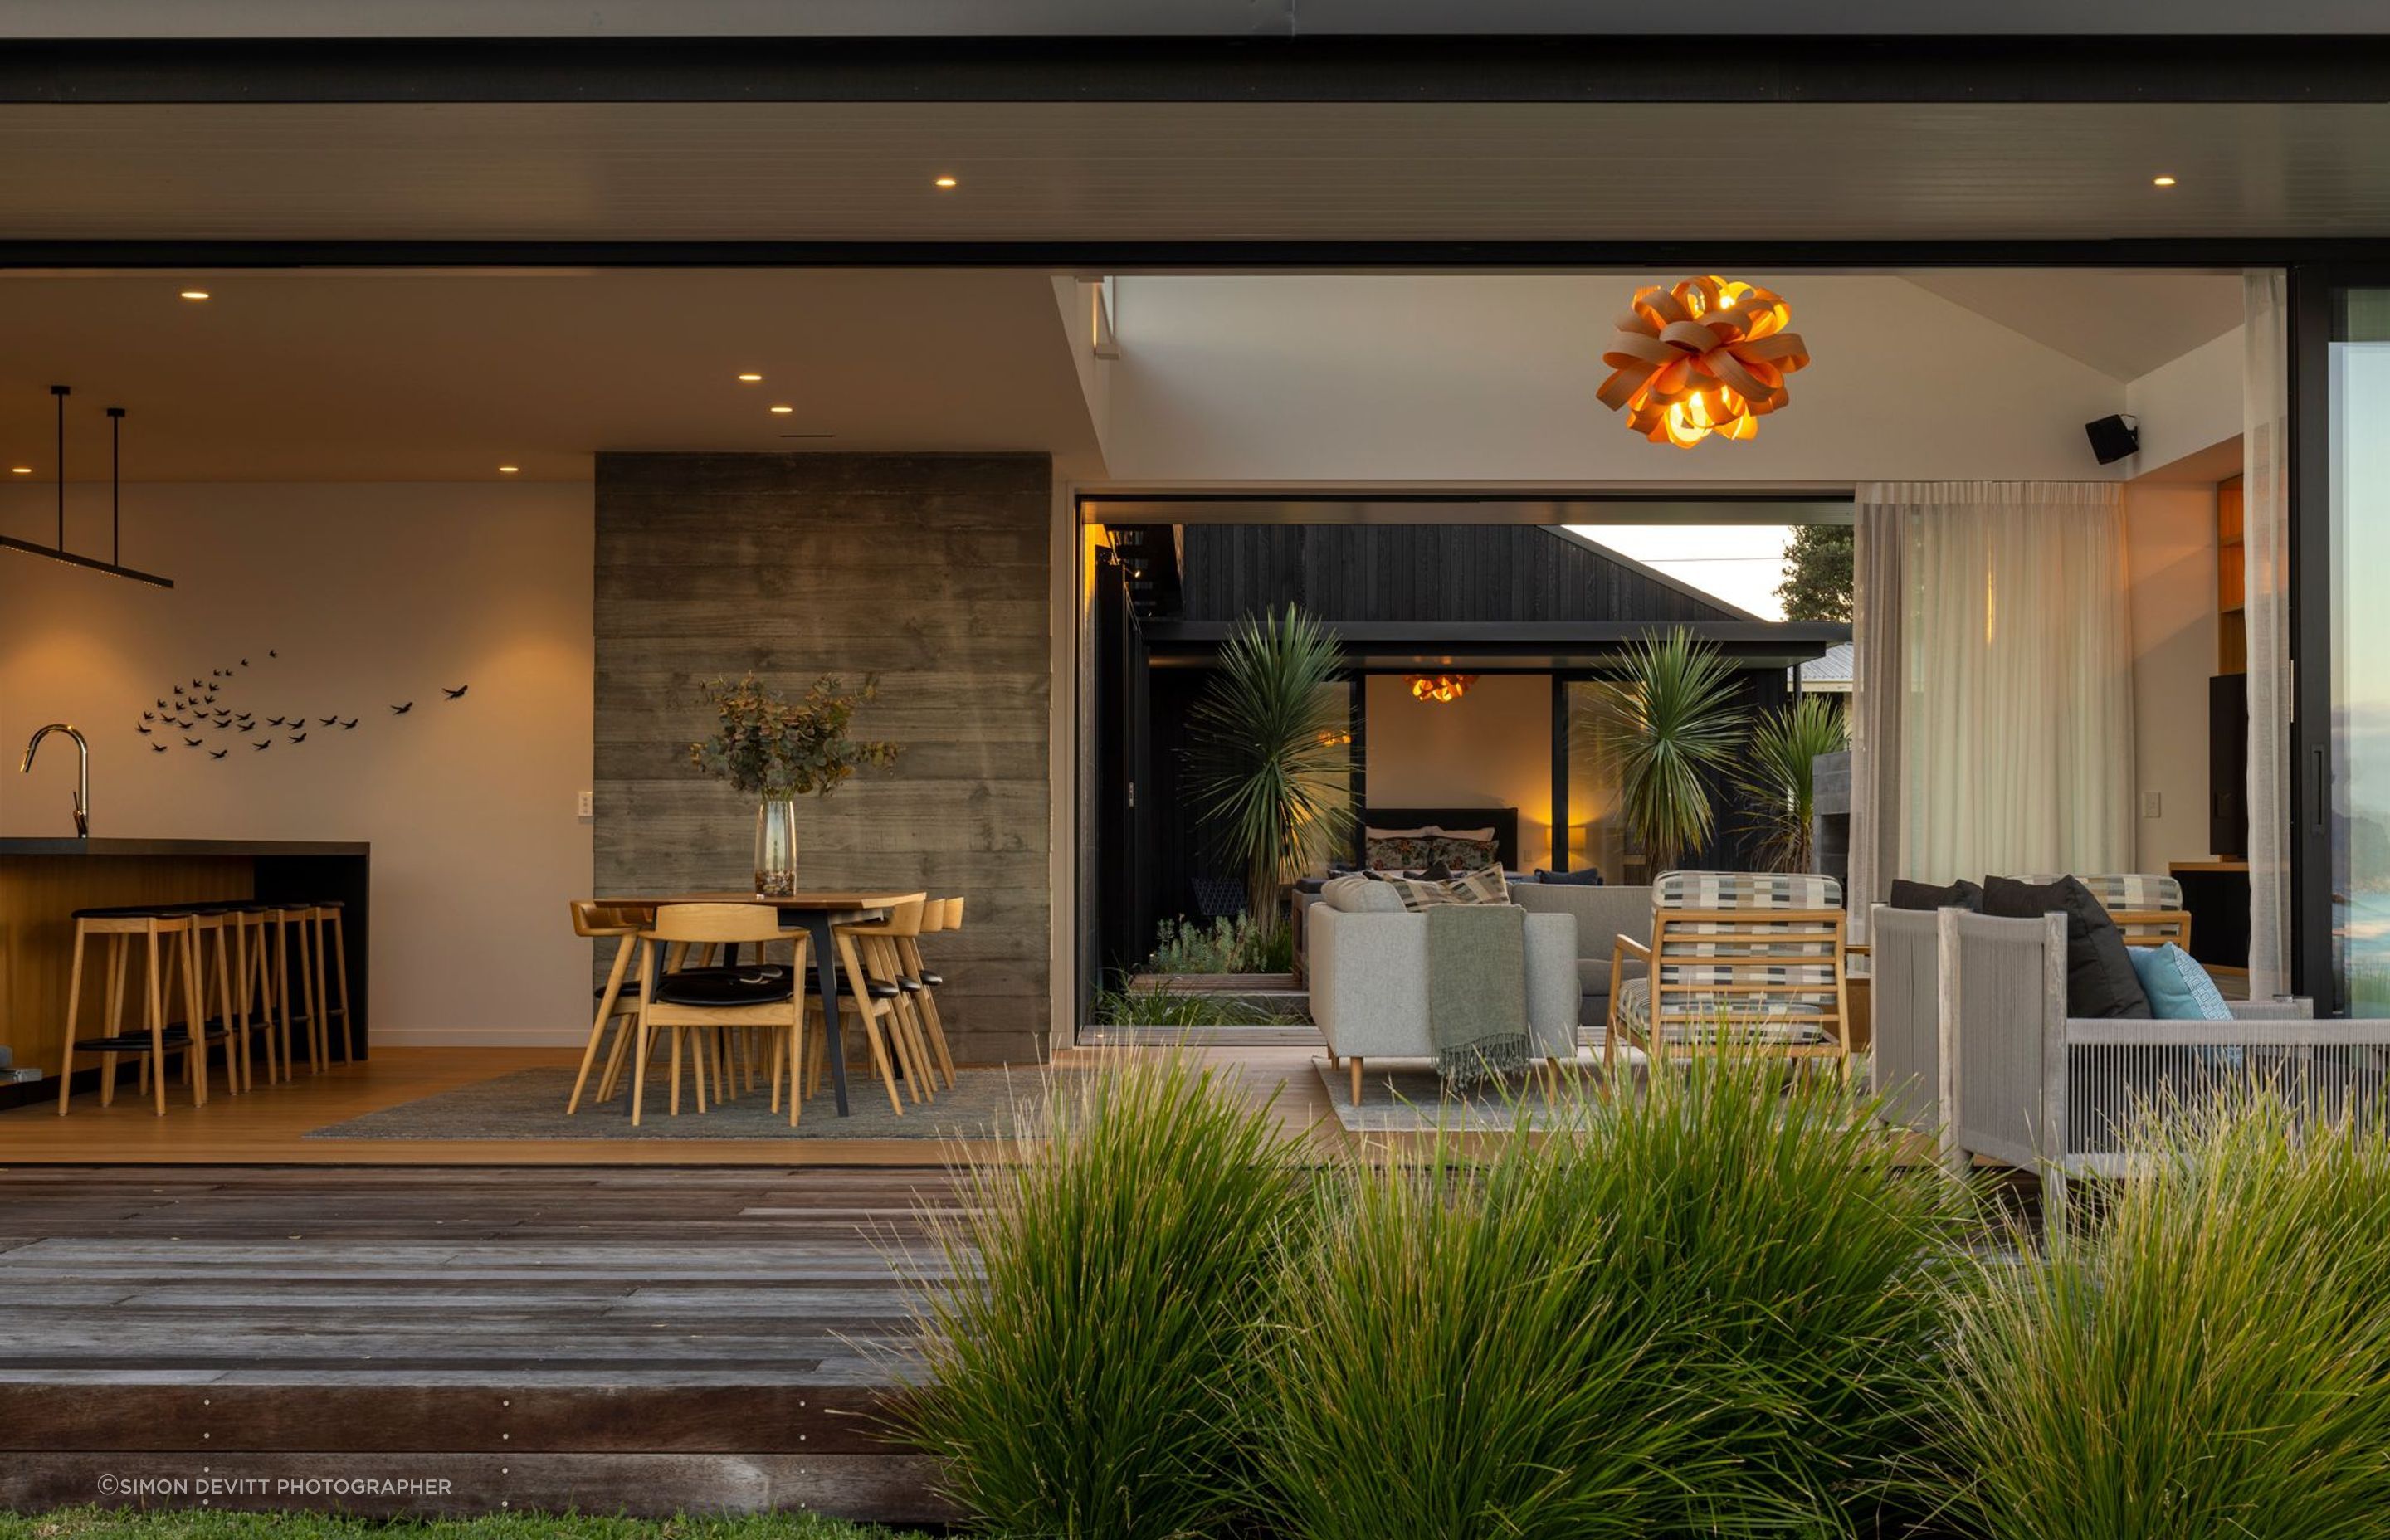 The layout perfectly summarises the concept of an ‘indoor-outdoor flow’ with spaces that foster a connection to nature.